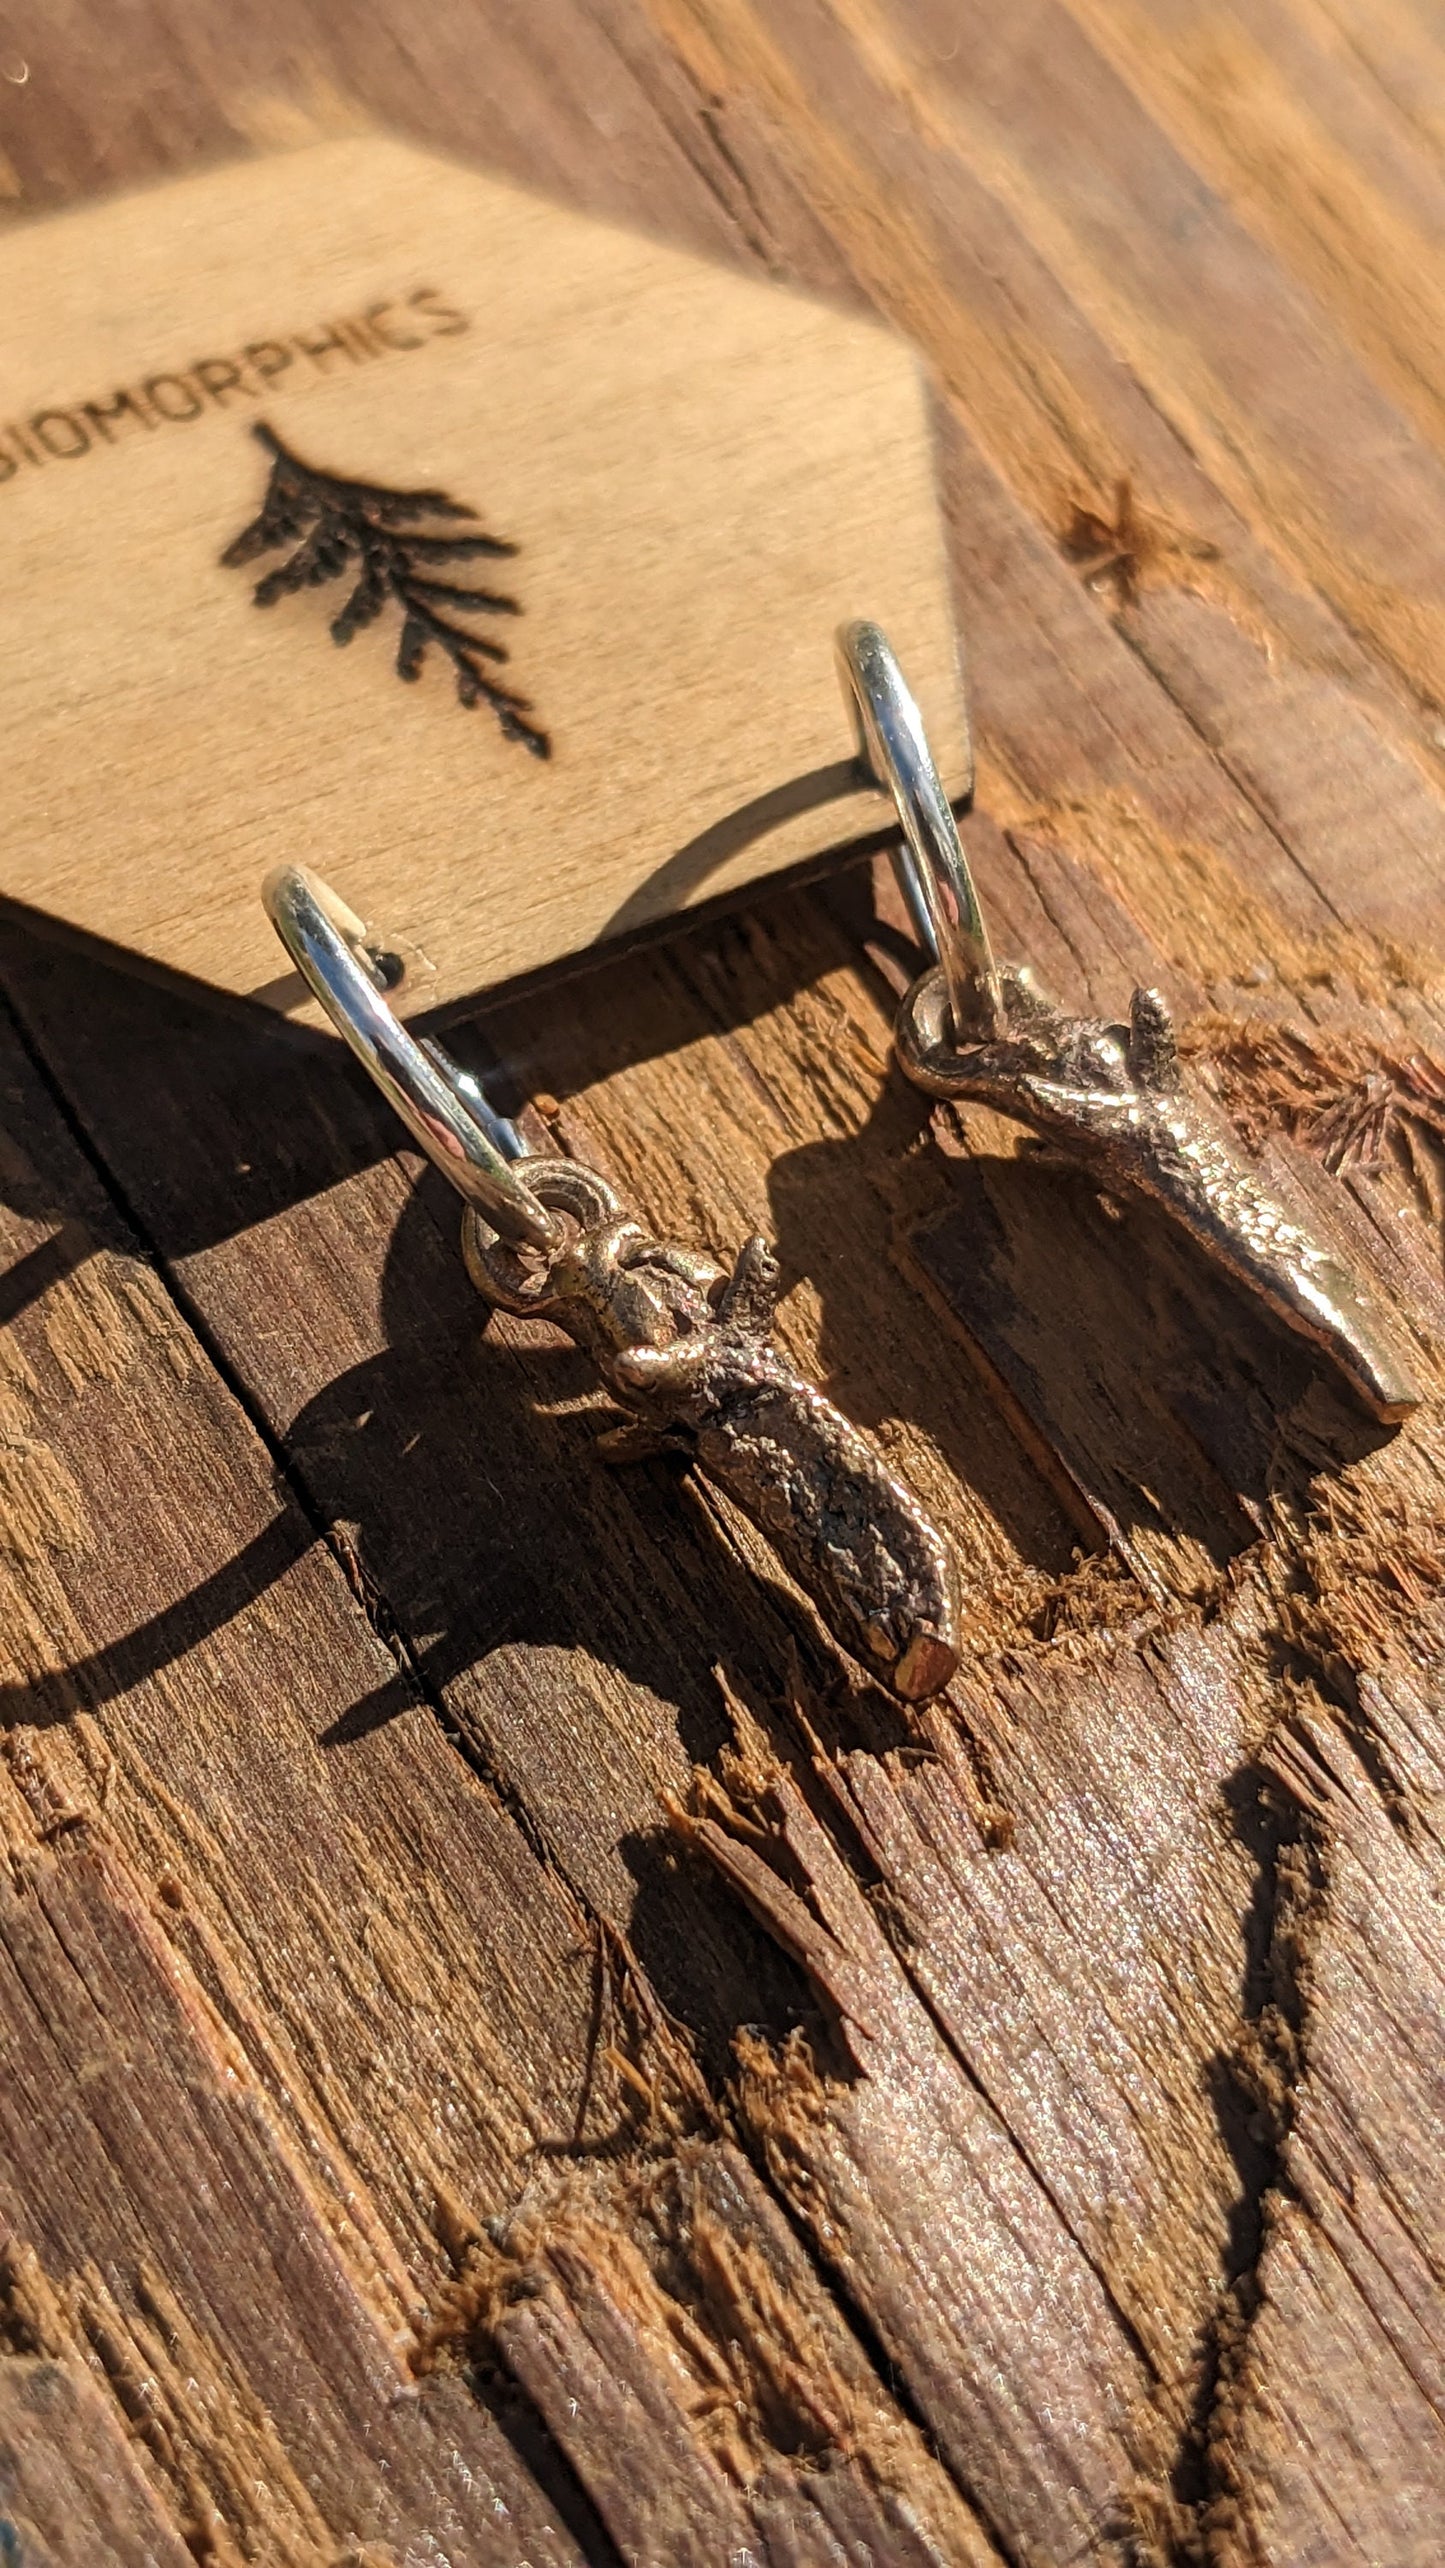 Clove Dangle Earrings - Mixed Metal Spice Jewelry in recycled Bronze and 925 Silver